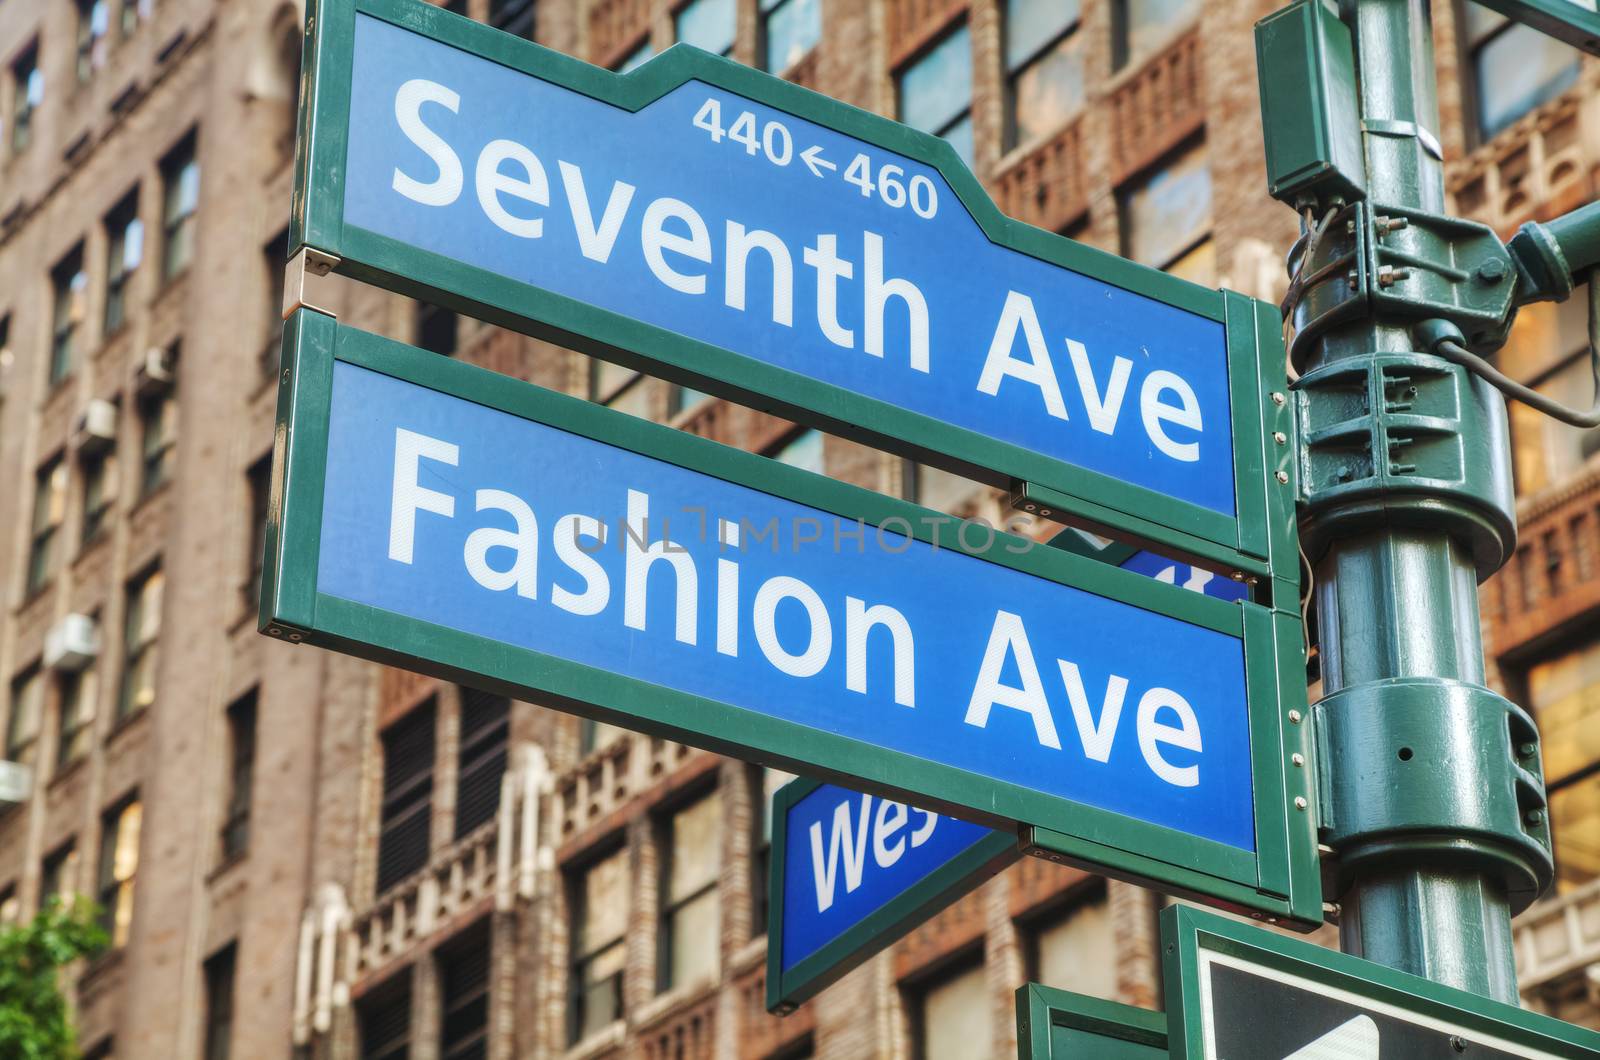 Seventh avenue sign by AndreyKr